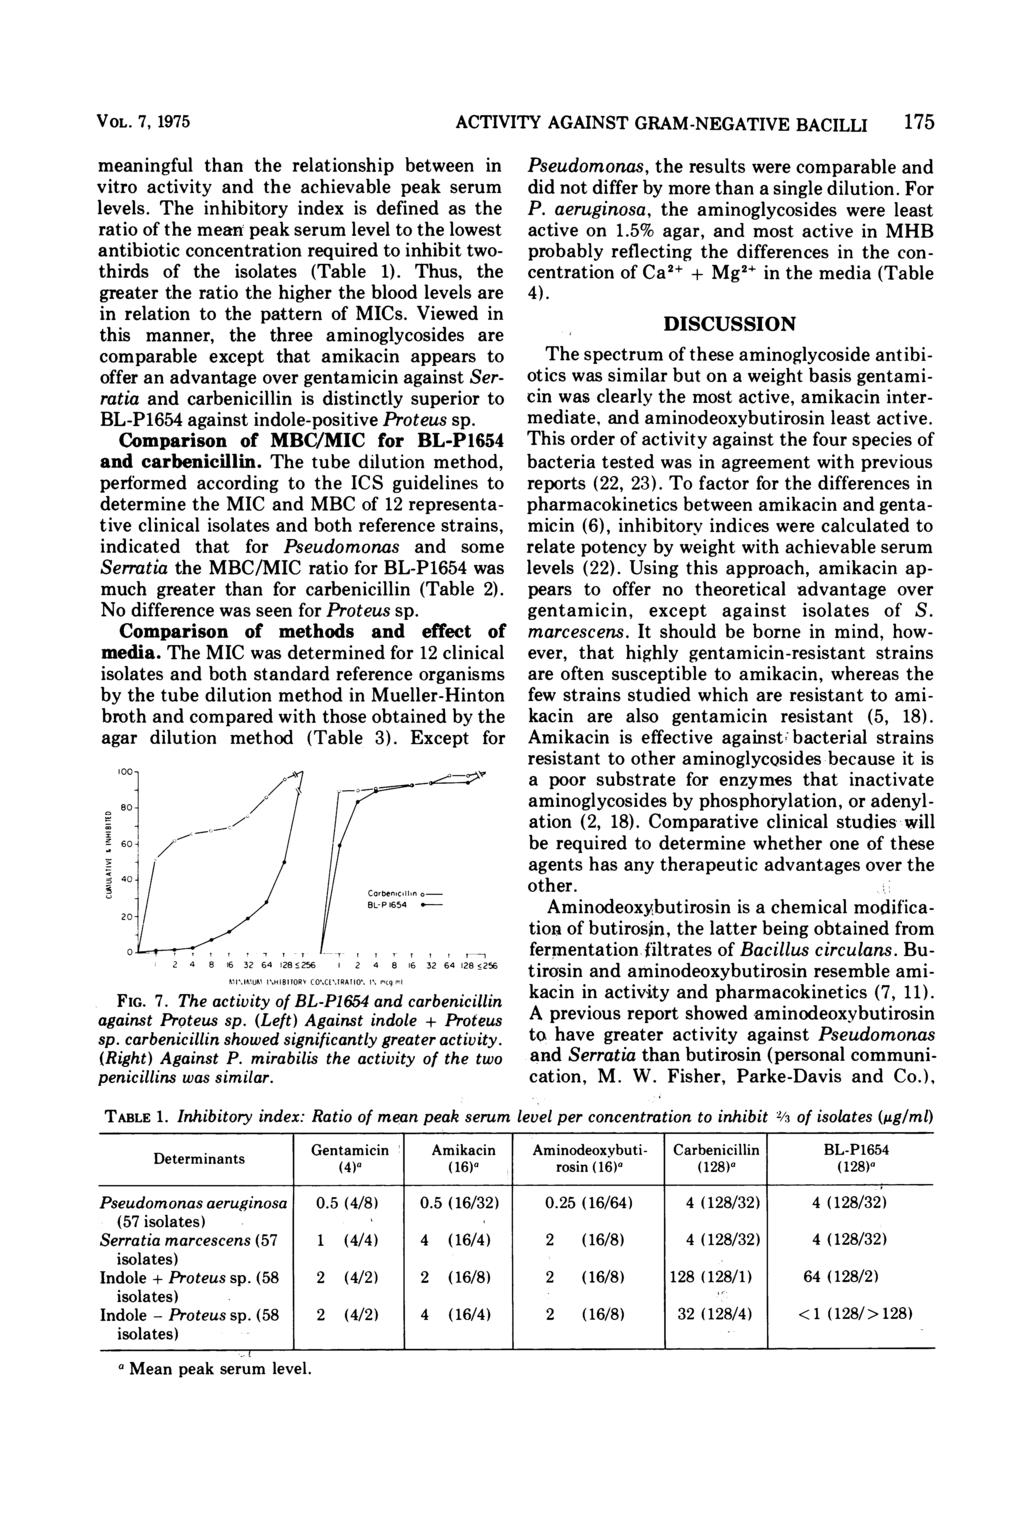 VOL. 7, 1975 ACTIVITY AGAINST GRAM-NEGATIVE BACILLI 175 meaningful than the relationship between in vitro activity and the achievable peak serum levels.